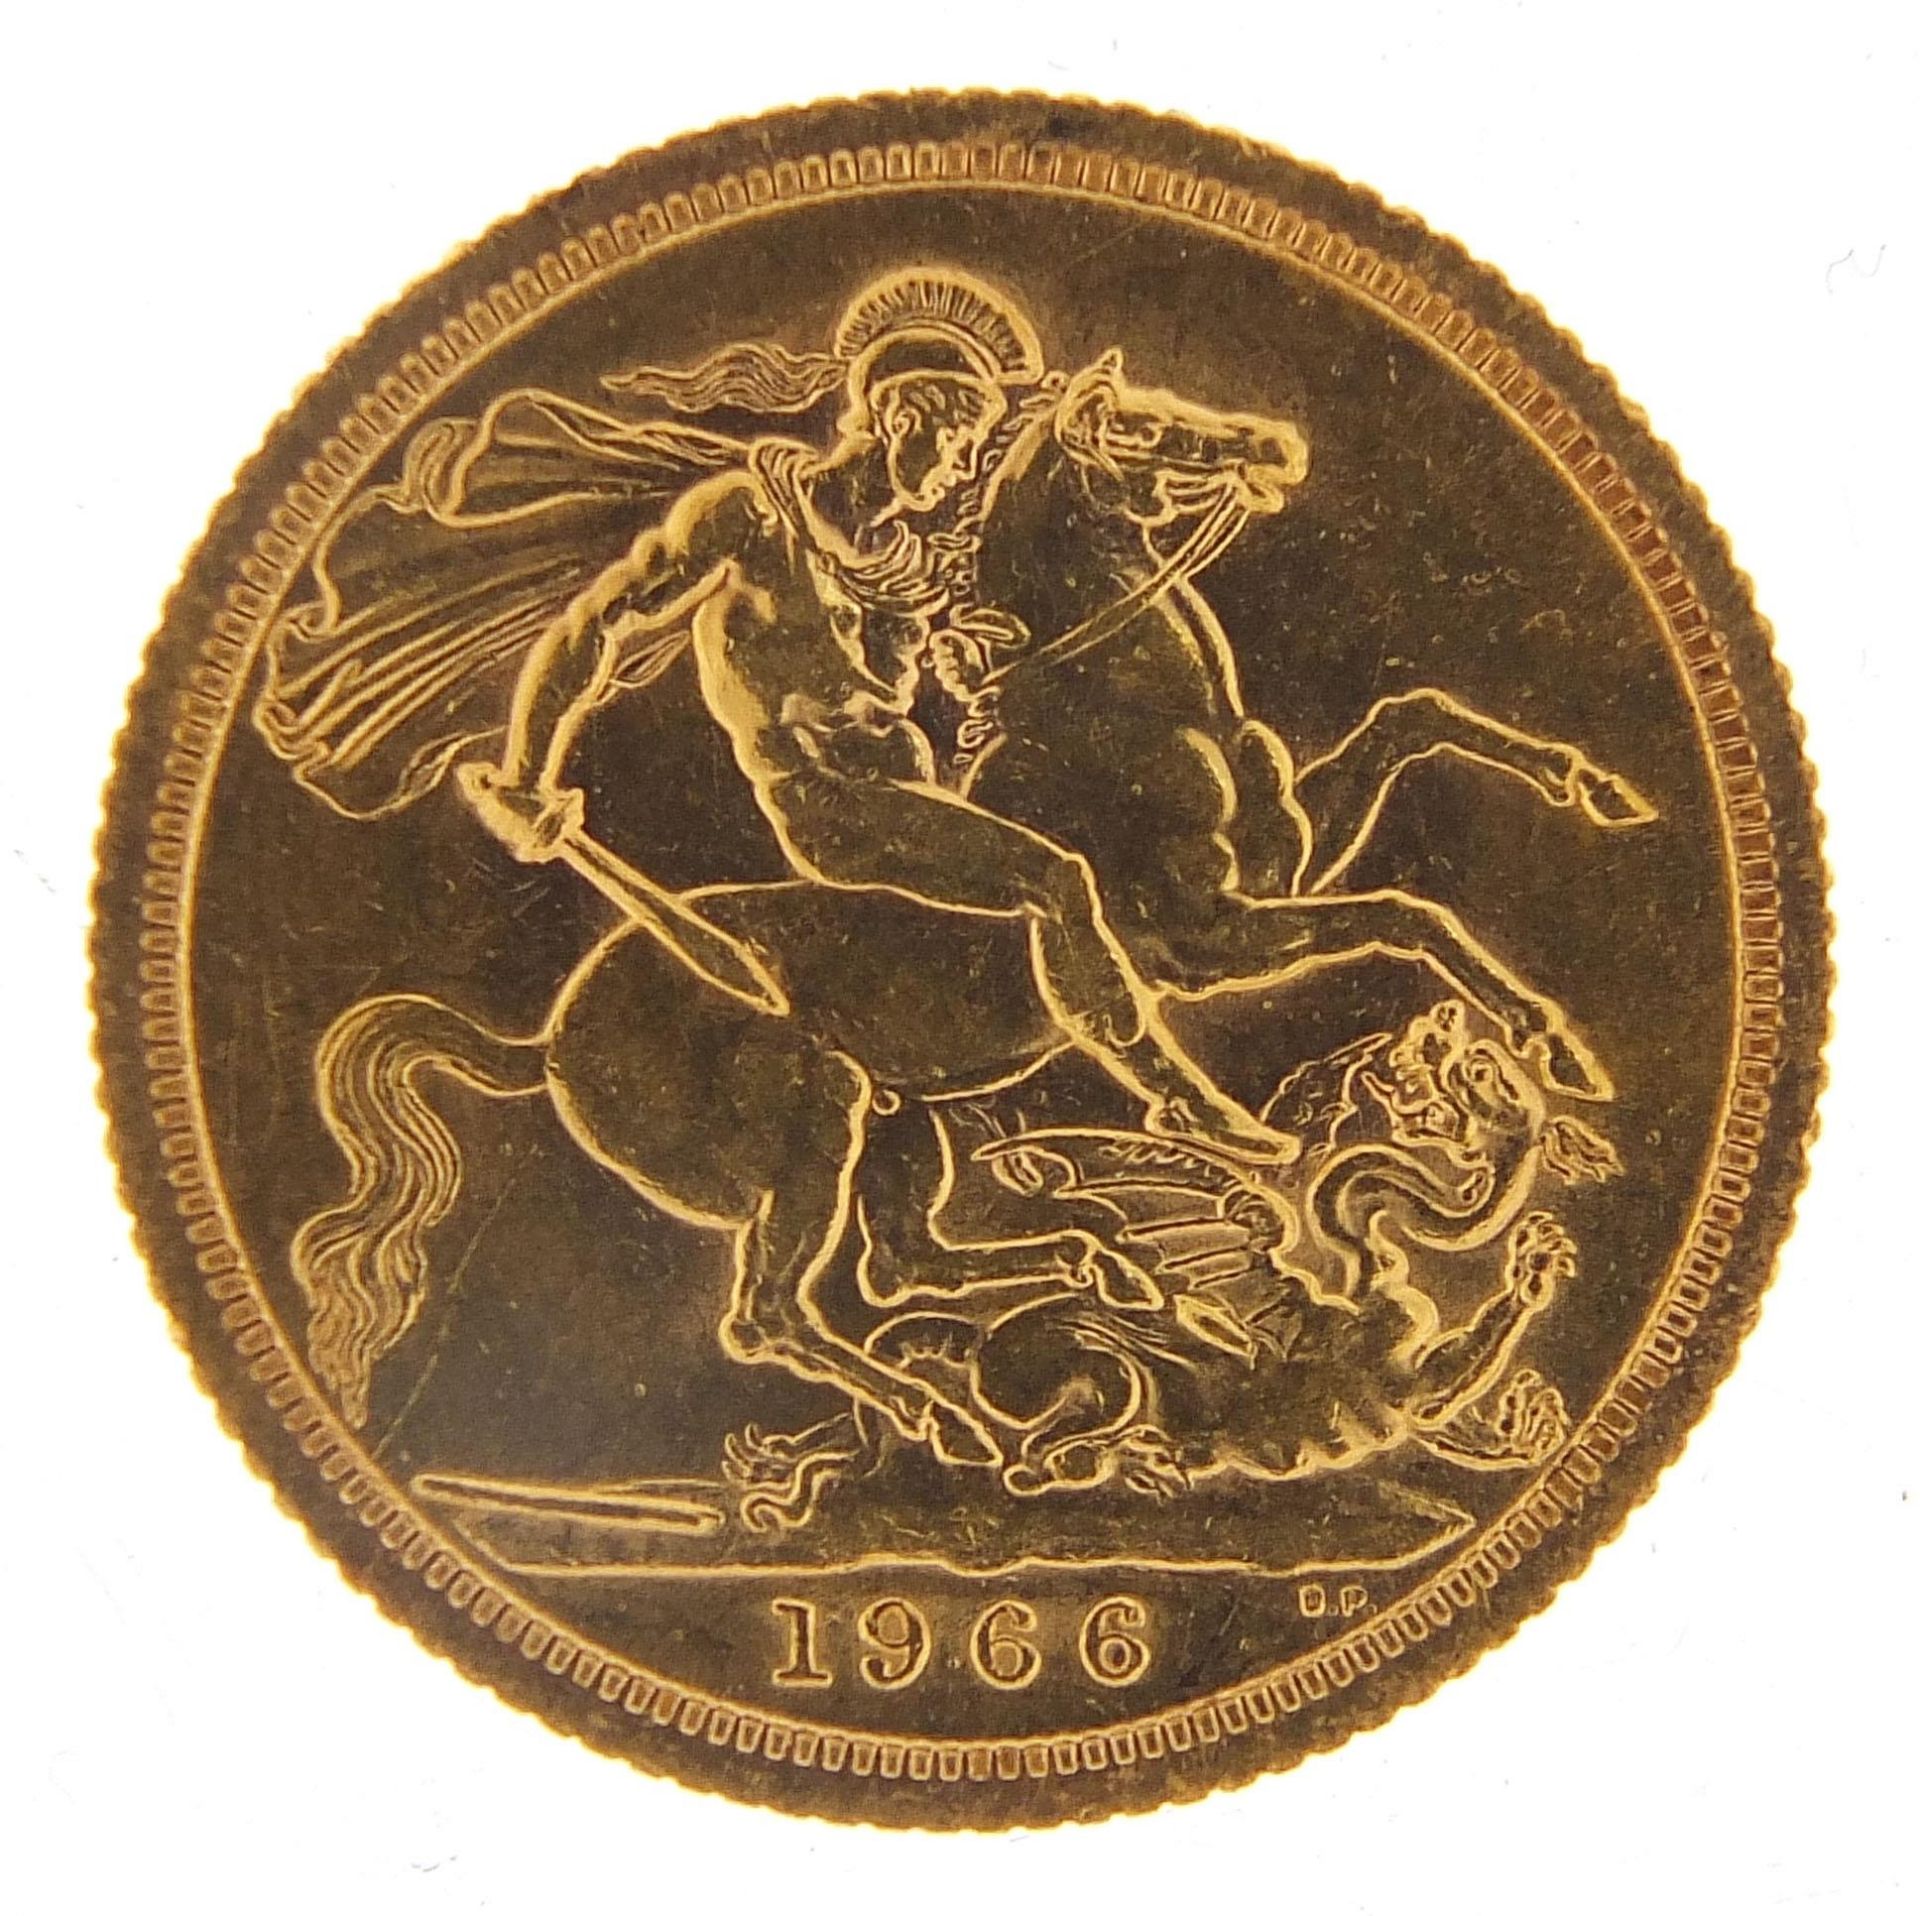 Elizabeth II 1966 gold sovereign - this lot is sold without buyer's premium